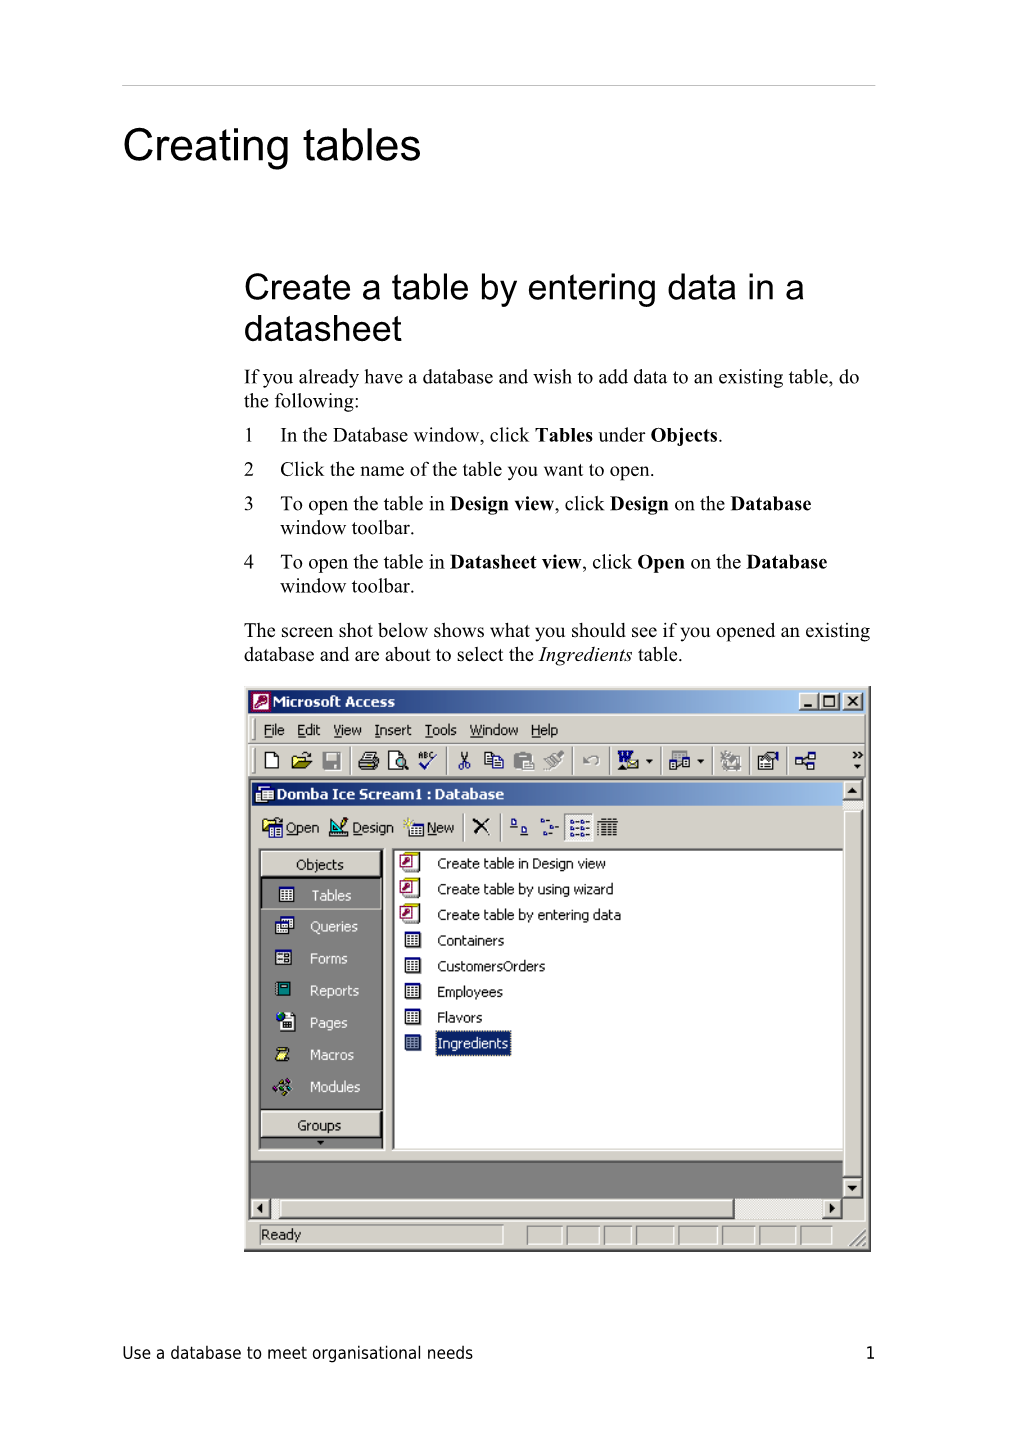 Create a Table by Entering Data in a Datasheet